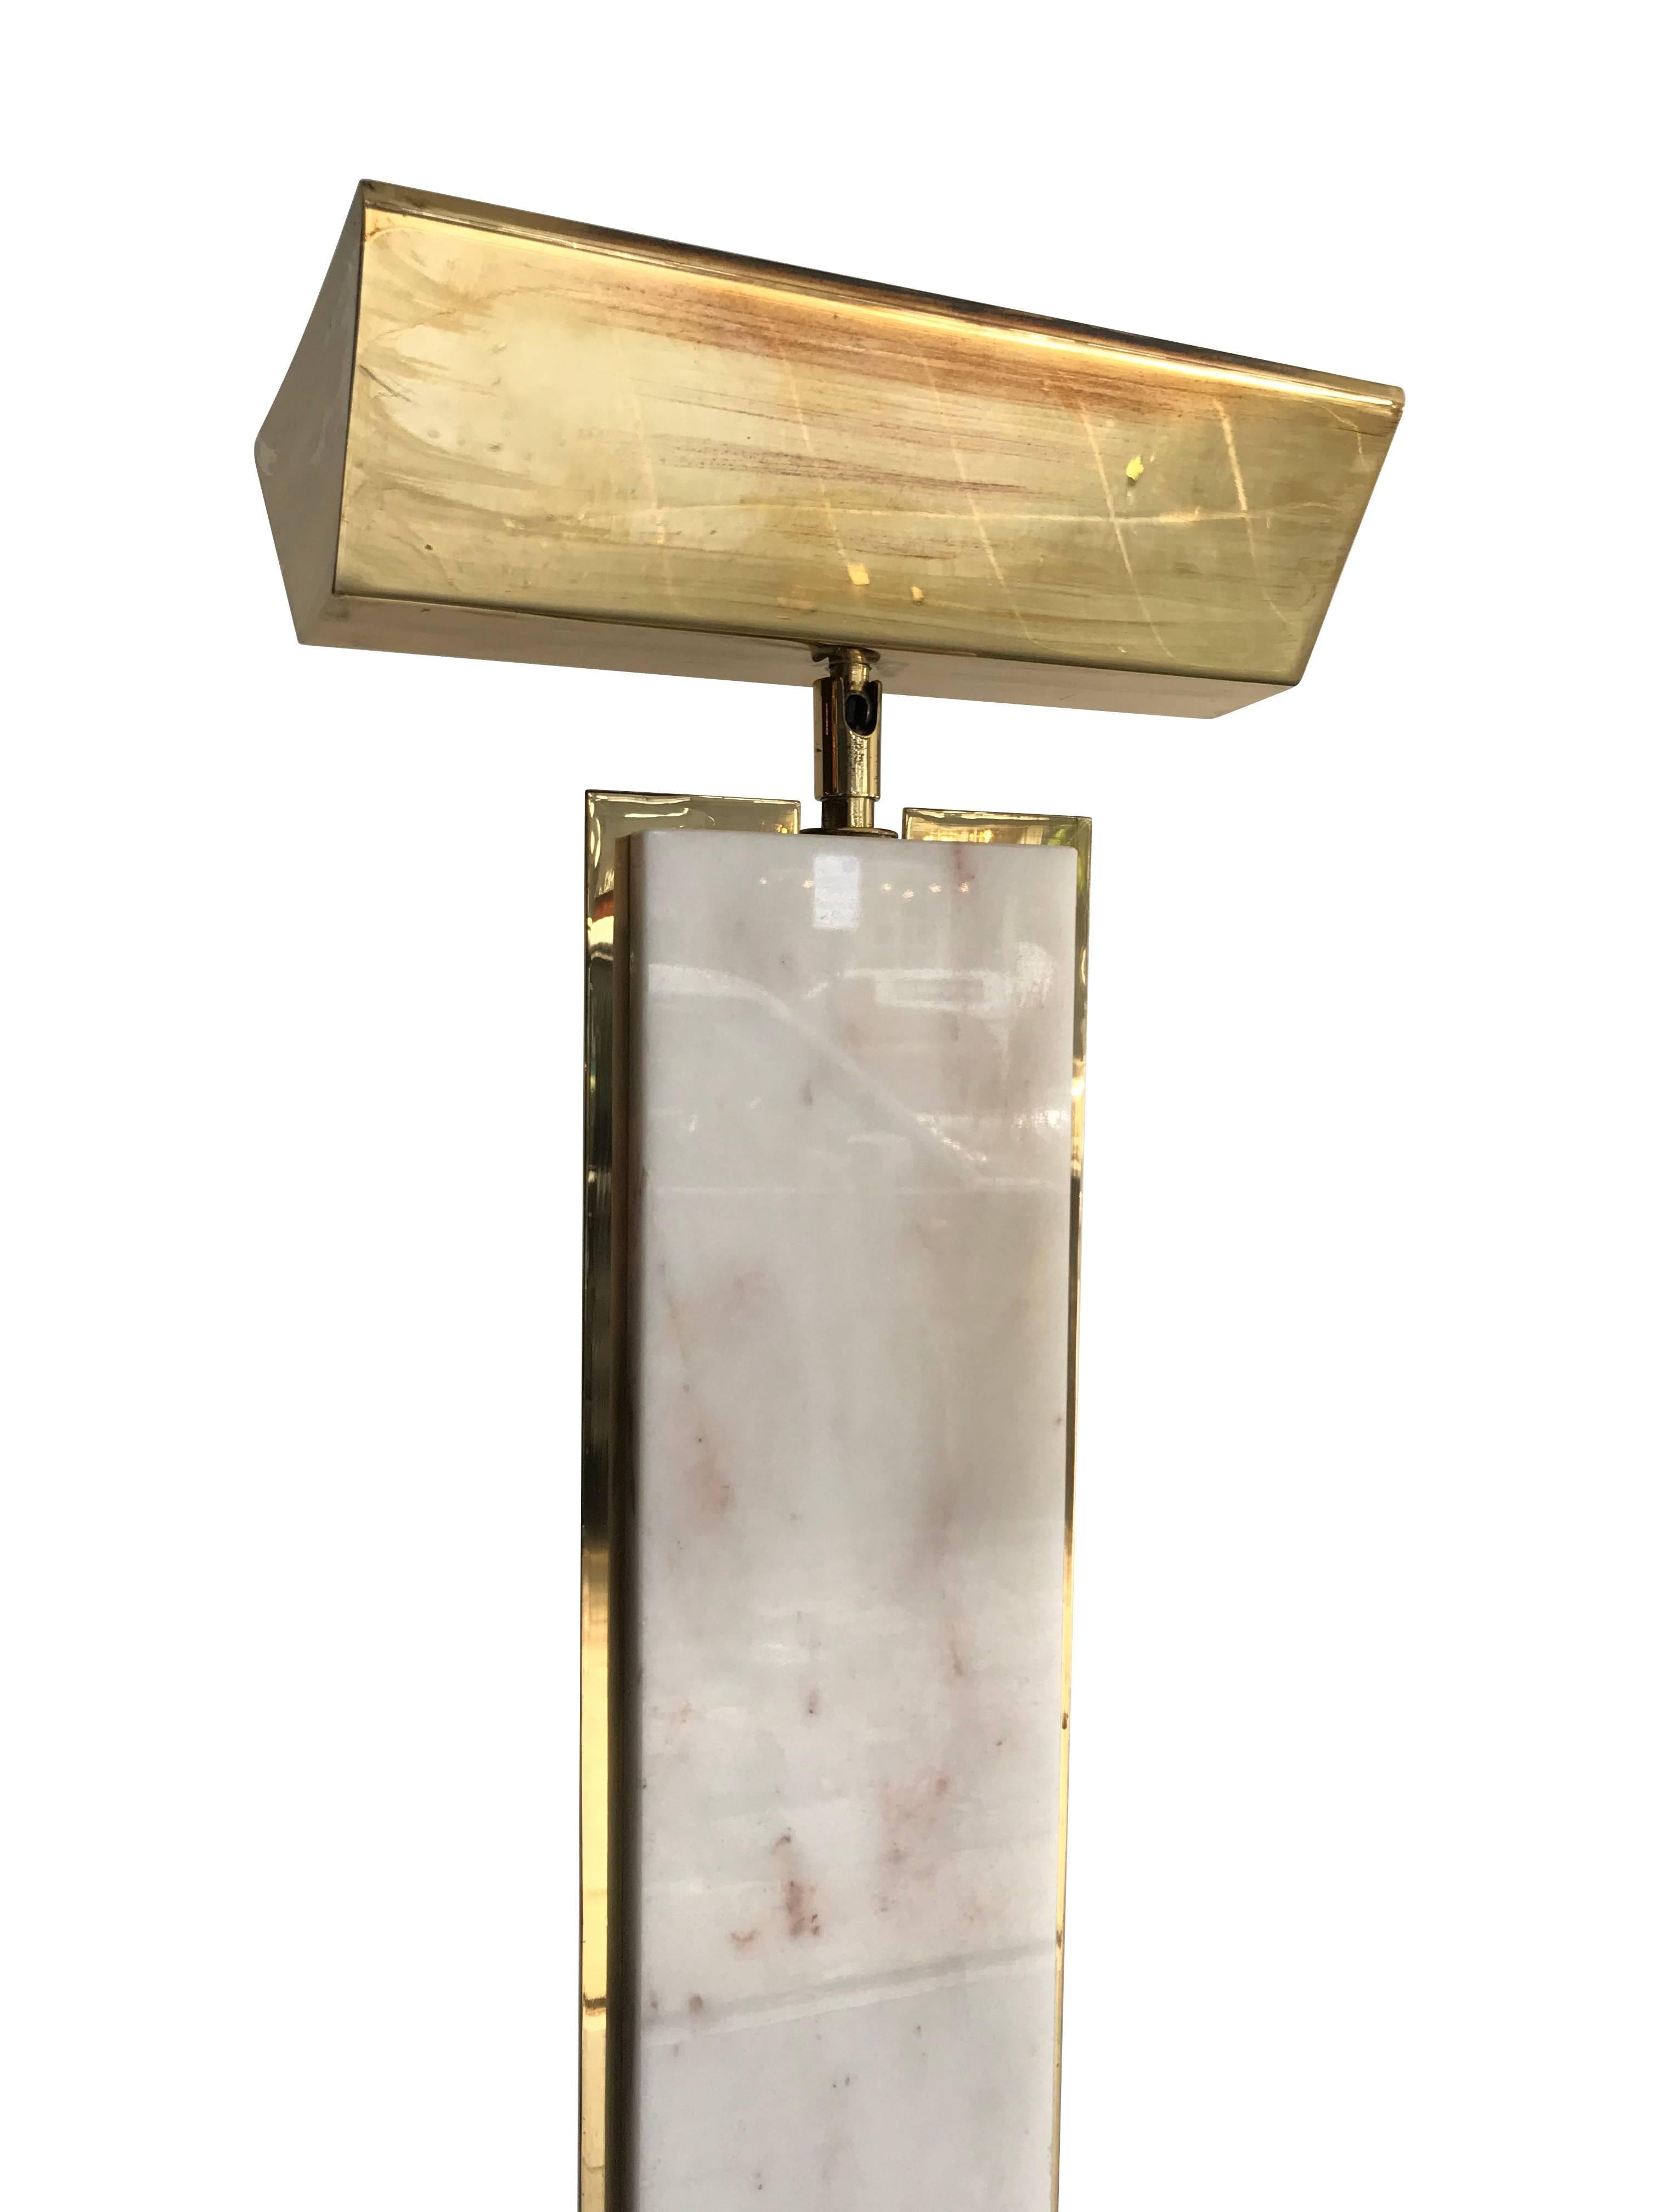 A floor lamp by Mauro Martini manufactured by Fratelli Martini, Italy, 1970s. The base and main column is solid Carrara marble with a slight pink fleck with brass surround frame and brass top uplighter.
Re wired with antique cord flex and foot